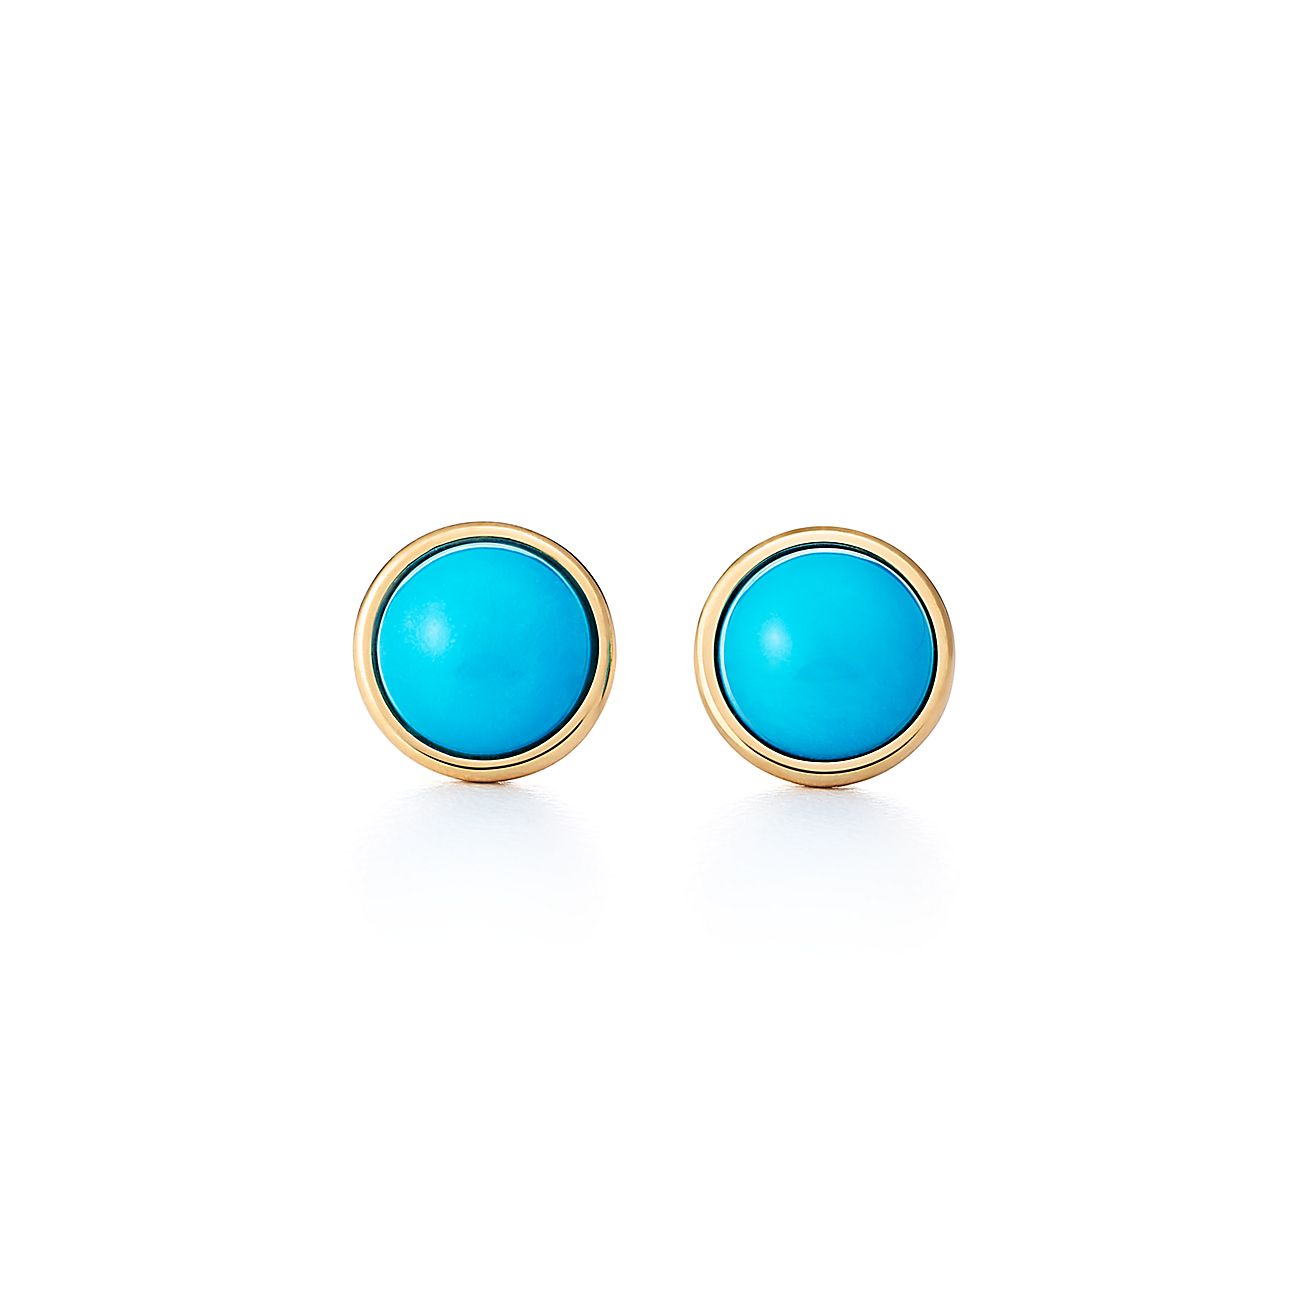 Elsa Peretti® Color by the Yard earrings in 18k gold with turquoise ...